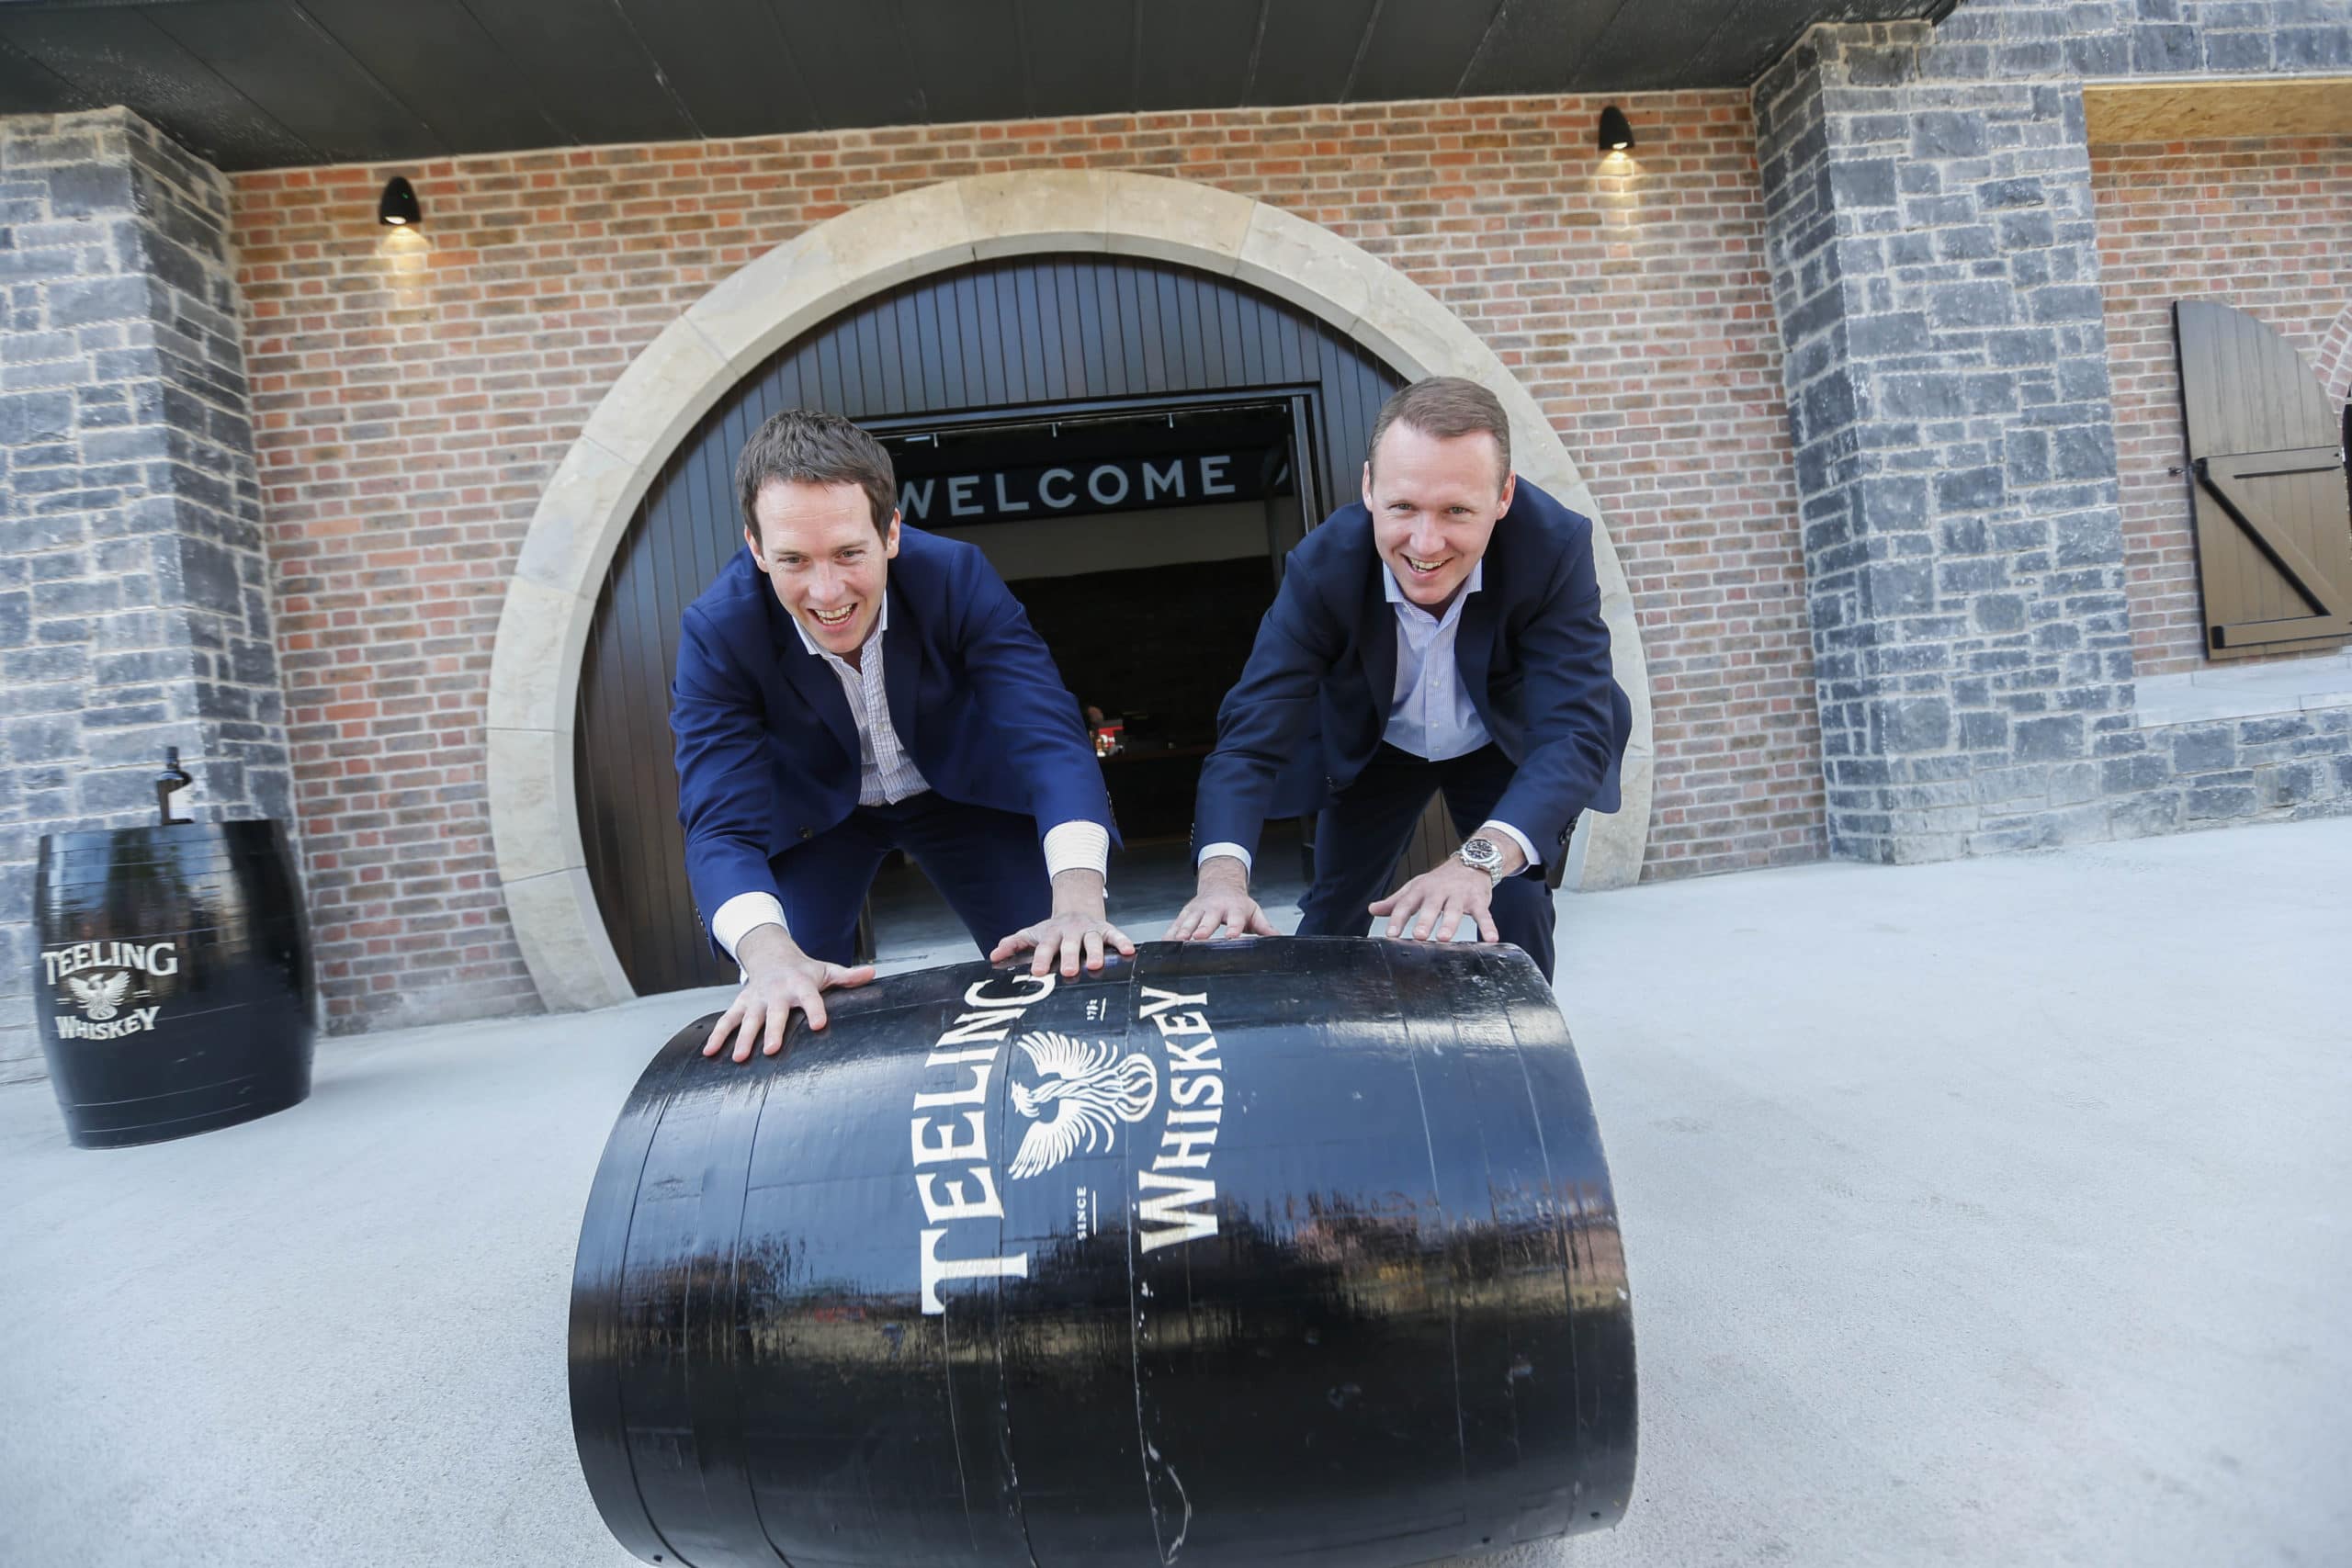 Teeling Whiskey Distillery scoops award for “Experience of the Year”